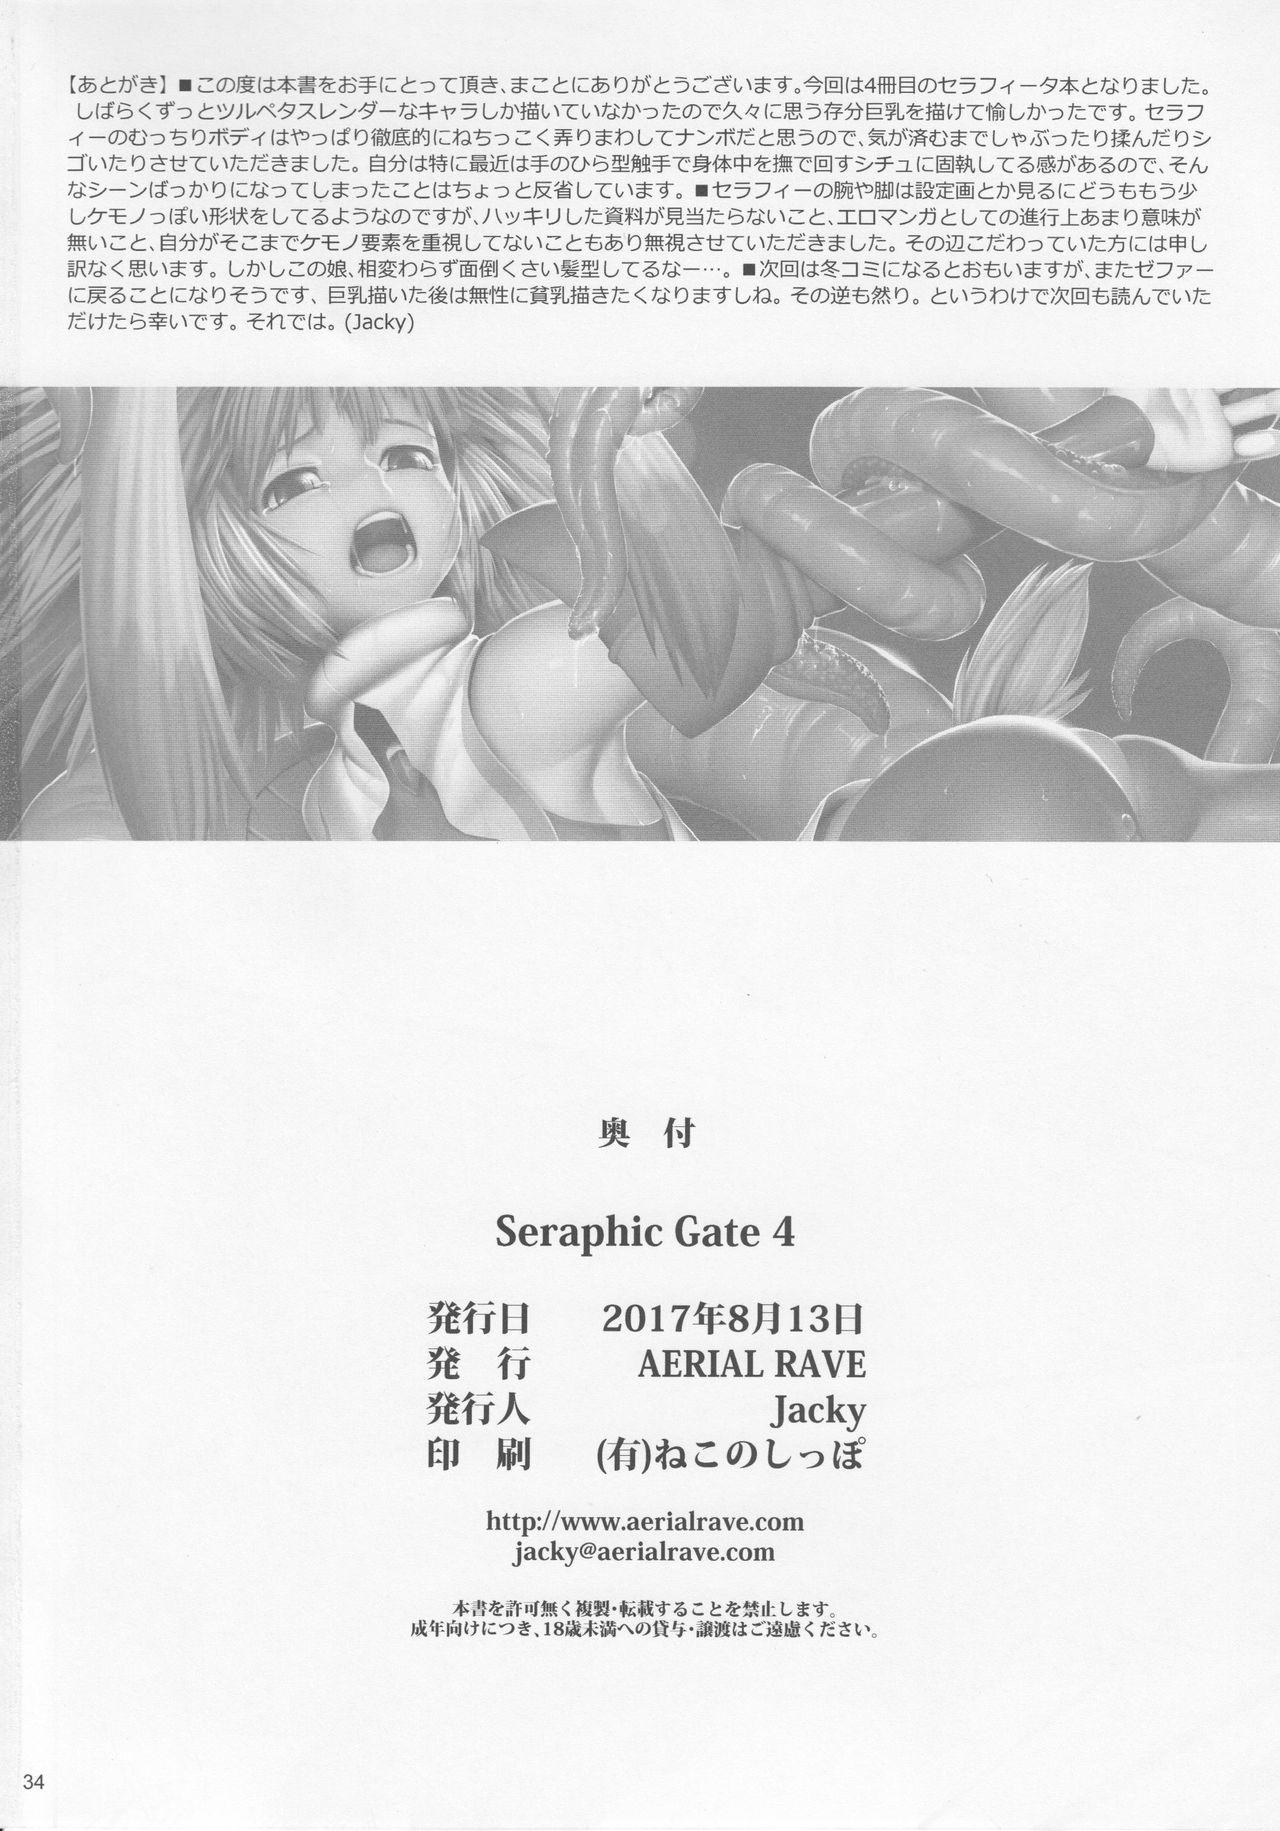 Housewife Seraphic Gate 4 - Xenogears Sex - Page 33